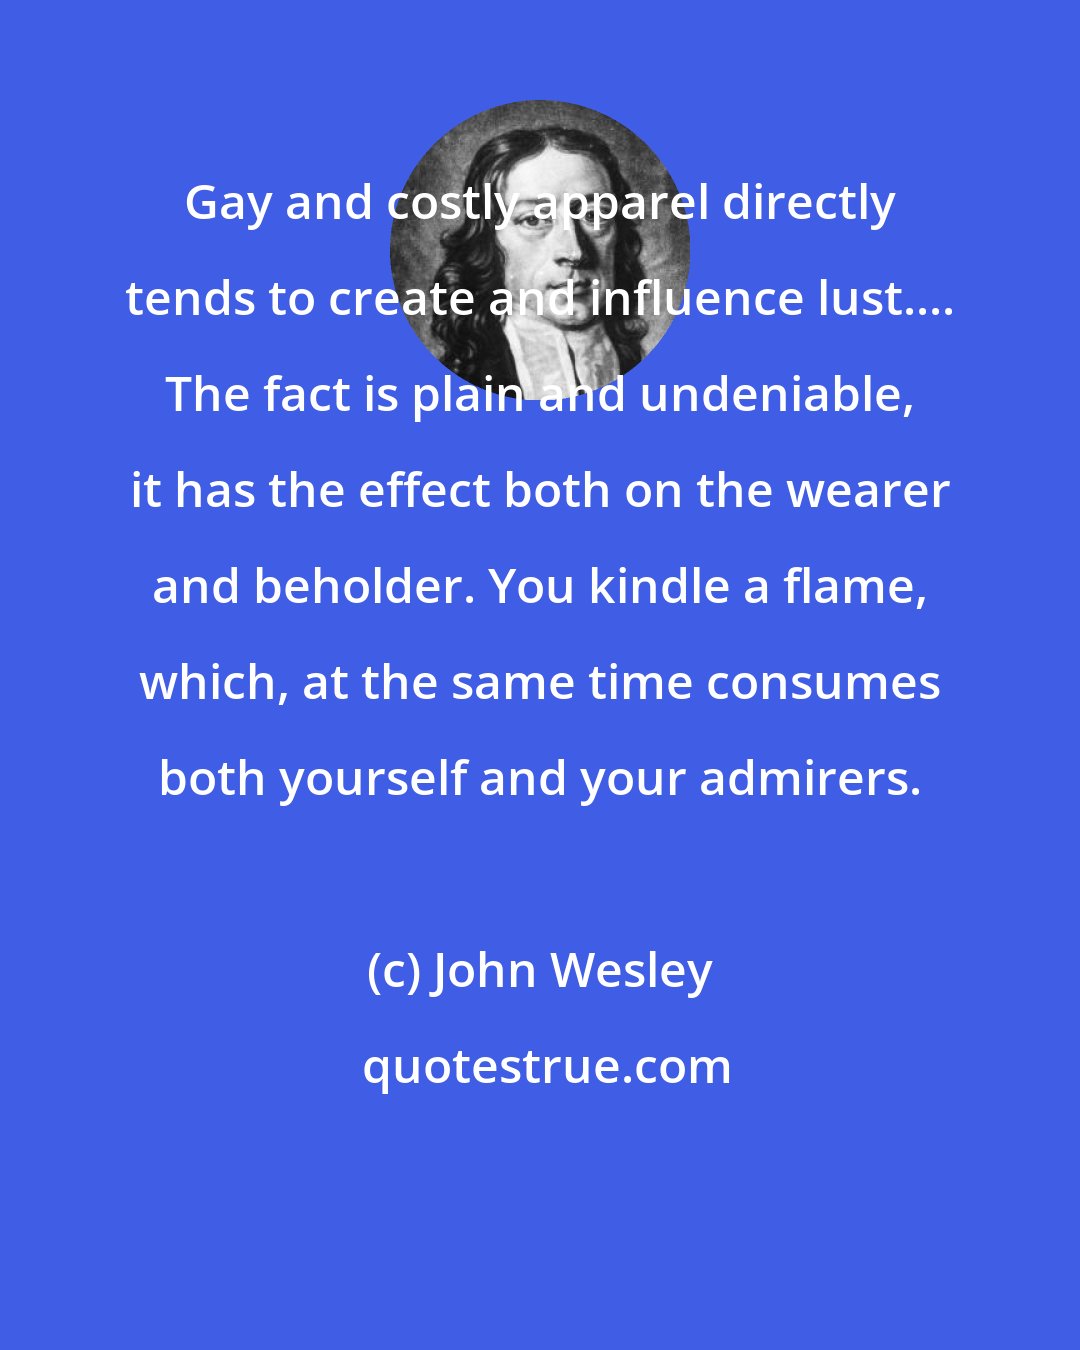 John Wesley: Gay and costly apparel directly tends to create and influence lust.... The fact is plain and undeniable, it has the effect both on the wearer and beholder. You kindle a flame, which, at the same time consumes both yourself and your admirers.